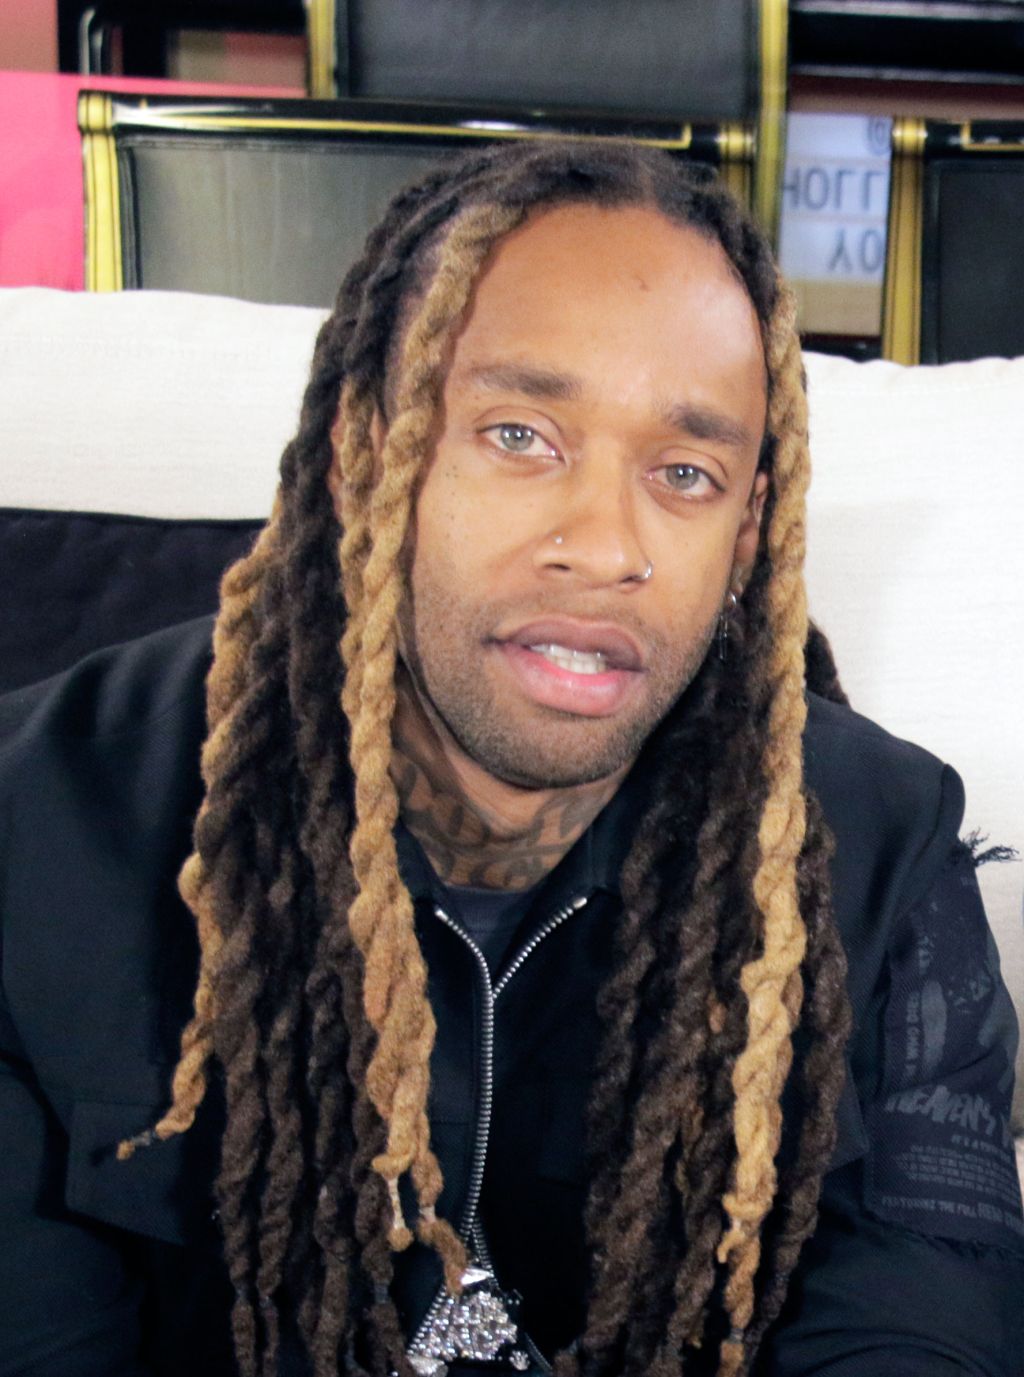 Ty Dolla $ign Visits Young Hollywood Studio